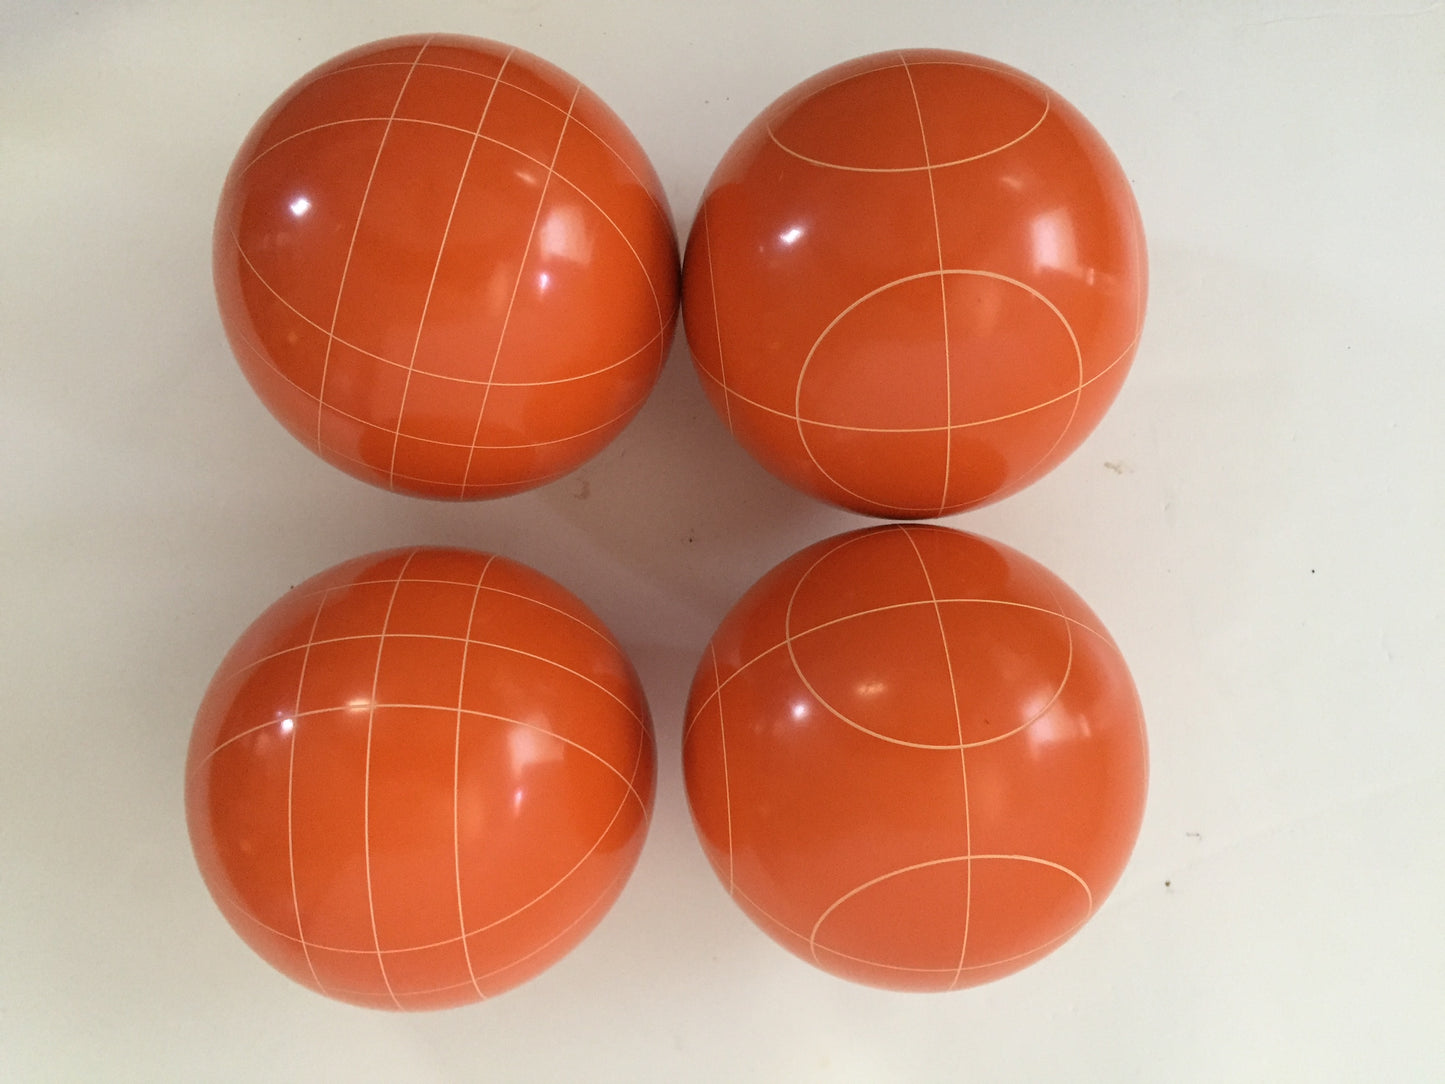 107mm 4 pack Bocce Balls  - Orange with 2 different scoring patterns